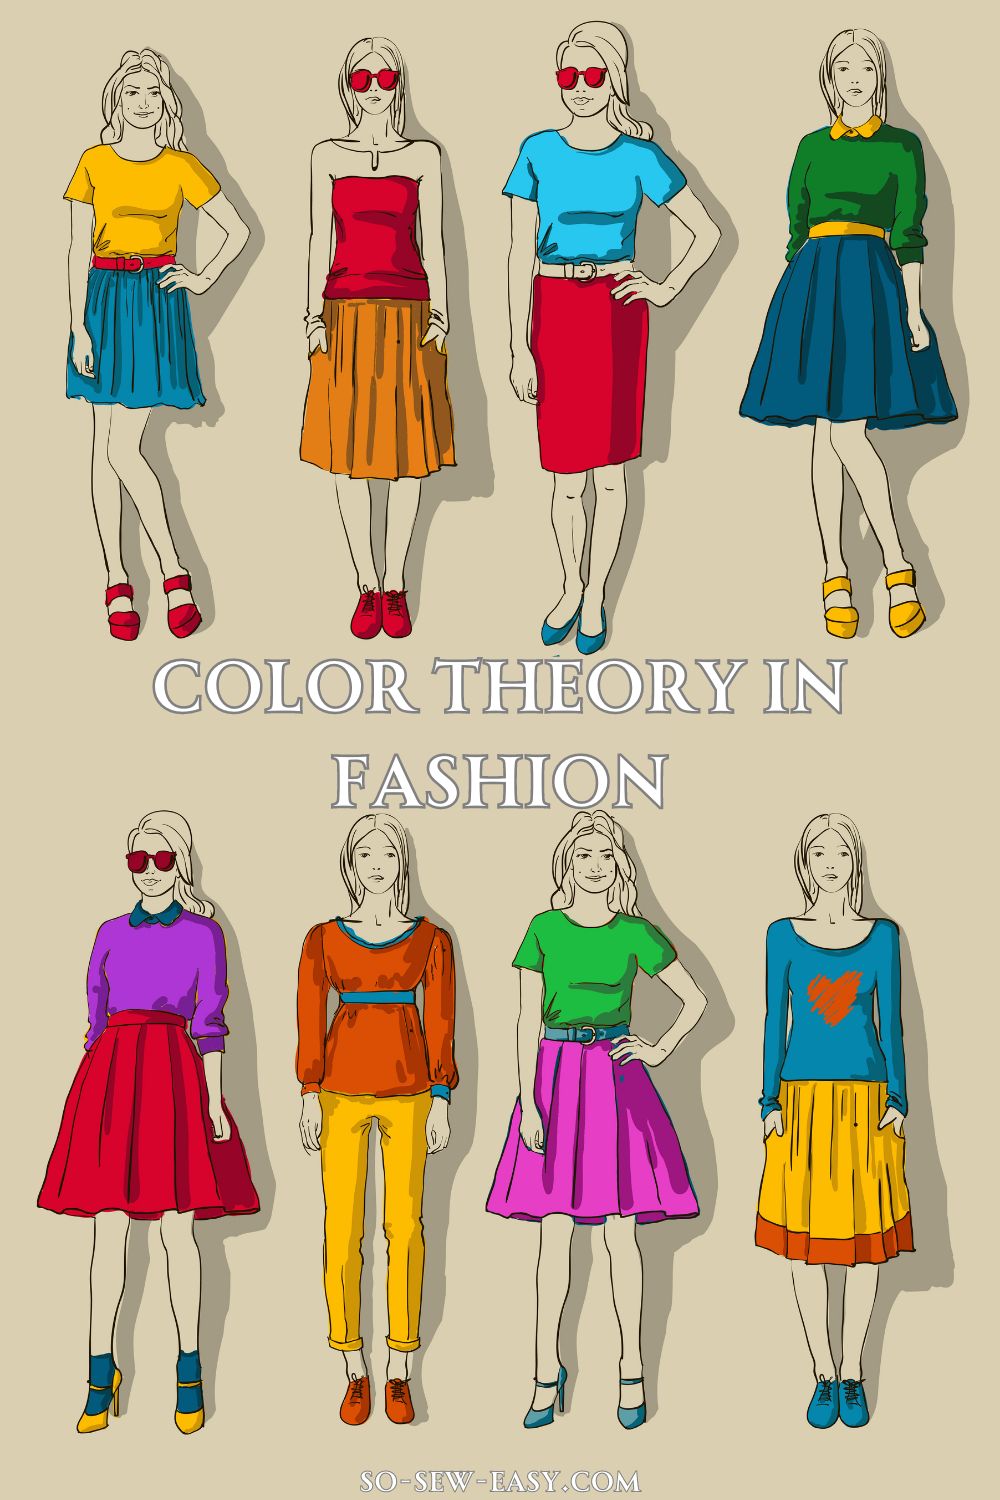 Color Theory In Fashion - The Clothing Color Wheel